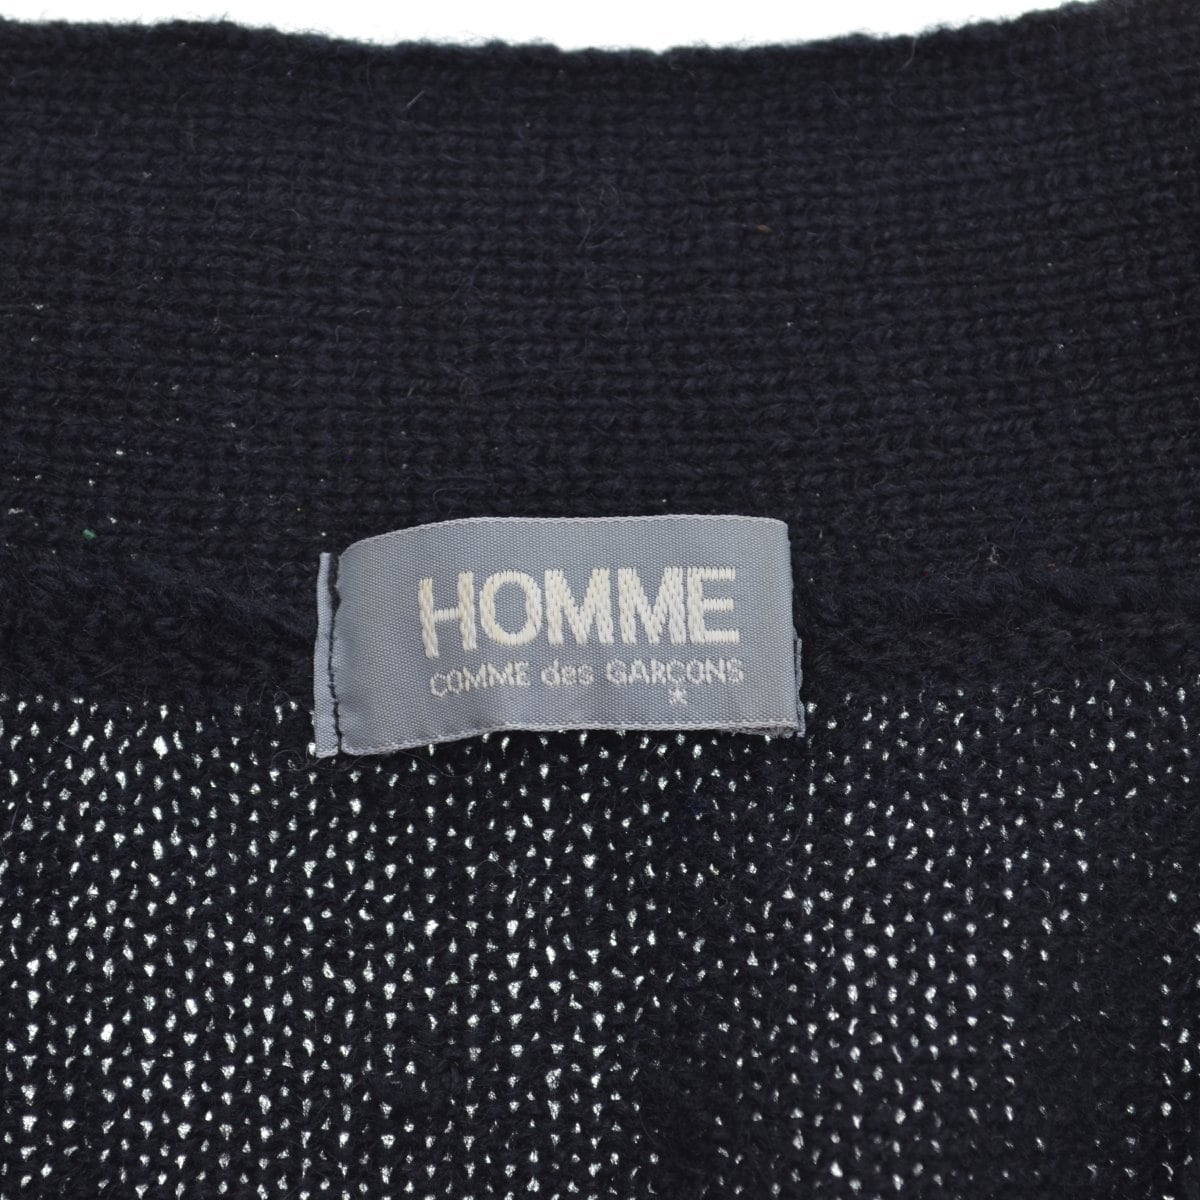 COMME des GARCONS HOMME / コムデギャルソン オム 80s デカオム archive ニットベスト | カンフル京都裏寺店  powered by BASE